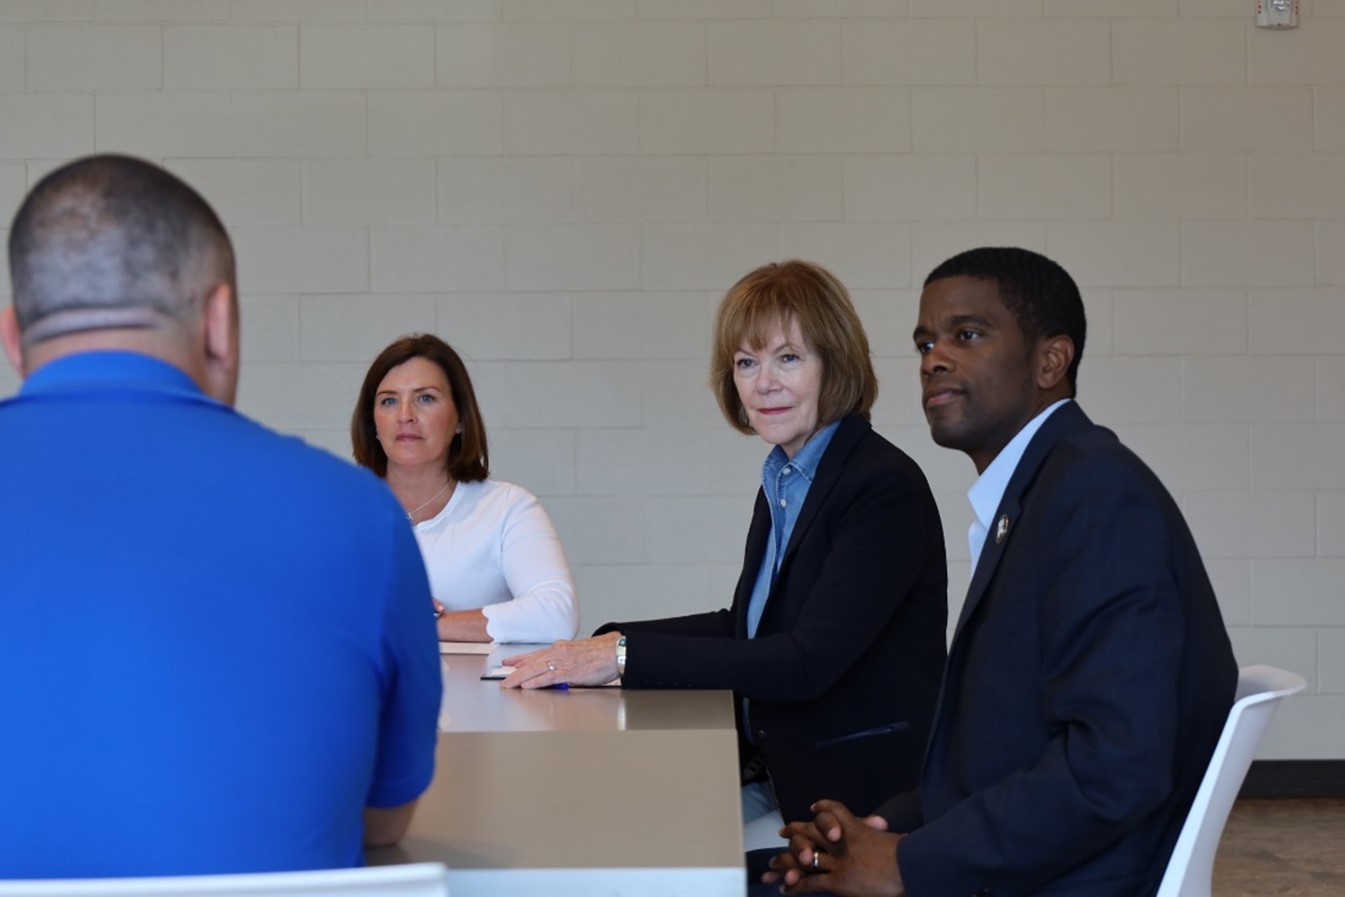 Second Harvest Heartland CEO Allison O’Toole attended a roundtable discussion with Senator Tina Smith and St. Paul Mayor Melvin Carter in June 2022 to discuss the growing need for food assistance. Senator Smith is a member of the Senate Agriculture Committee.